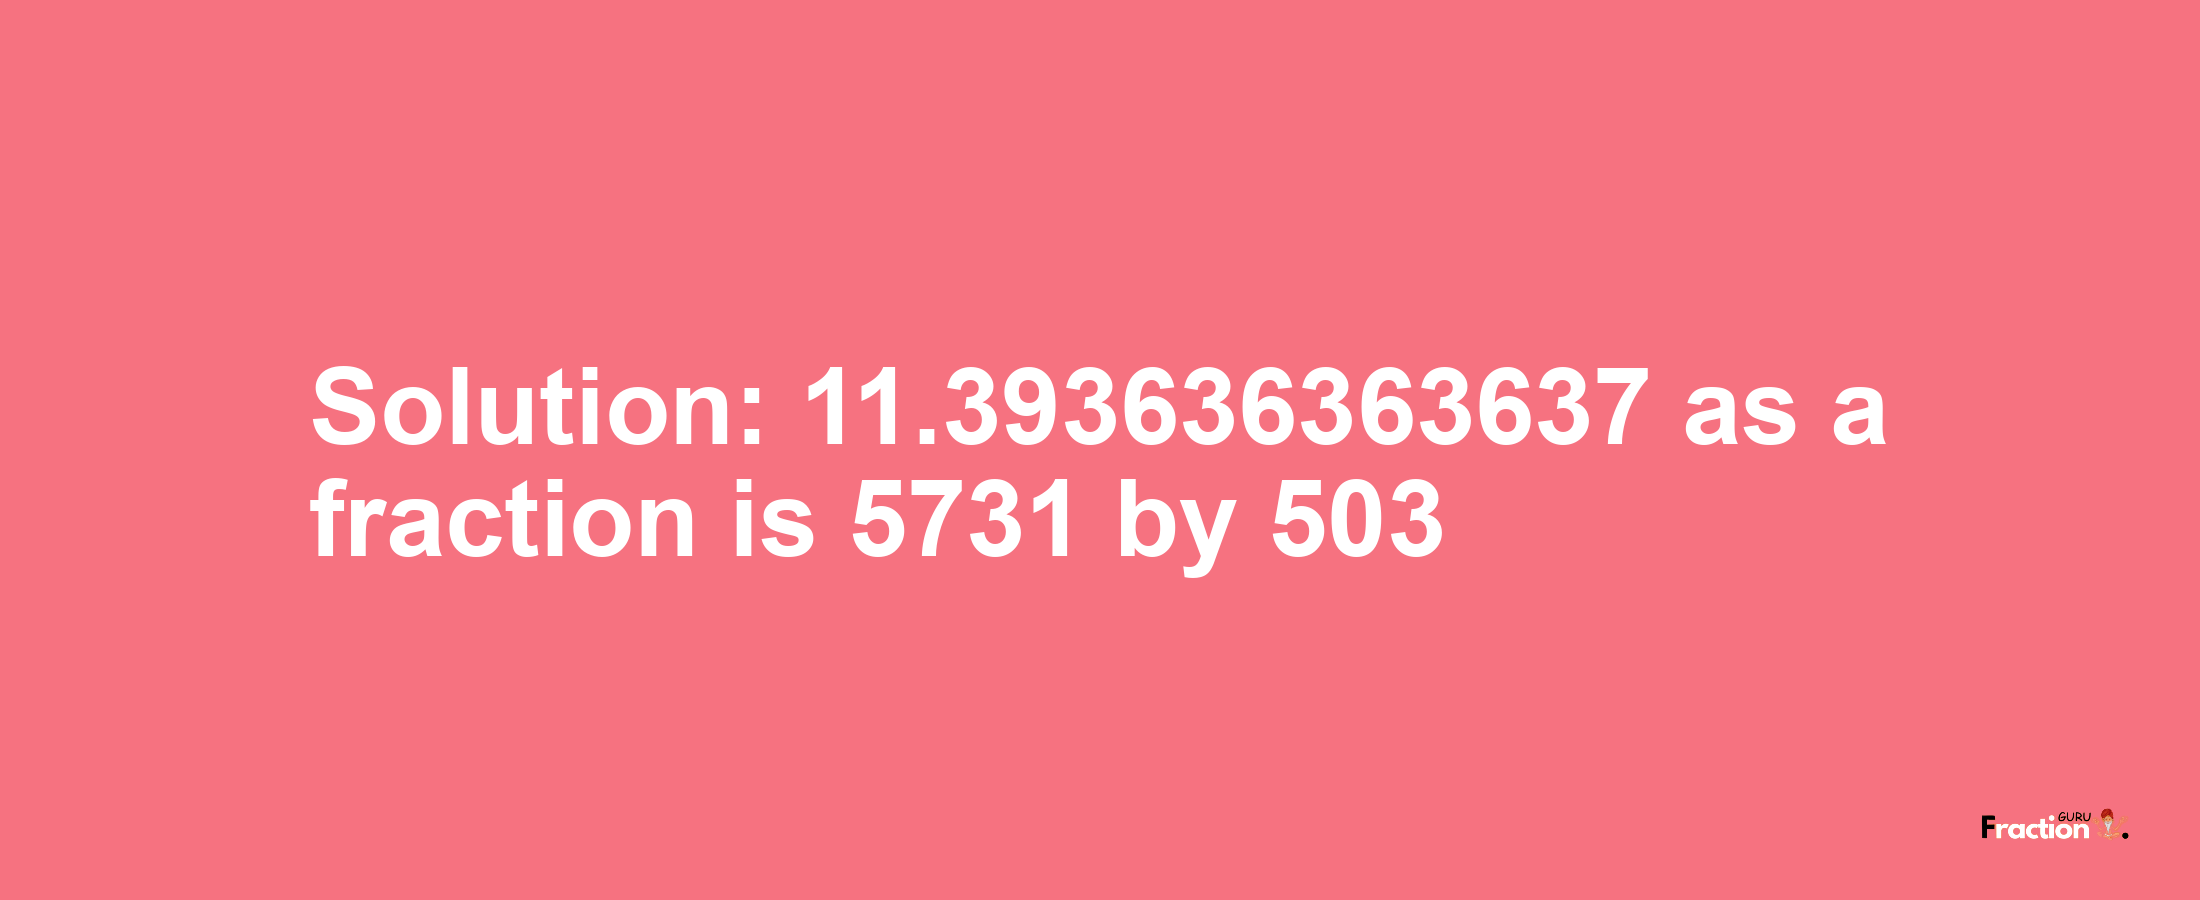 Solution:11.393636363637 as a fraction is 5731/503